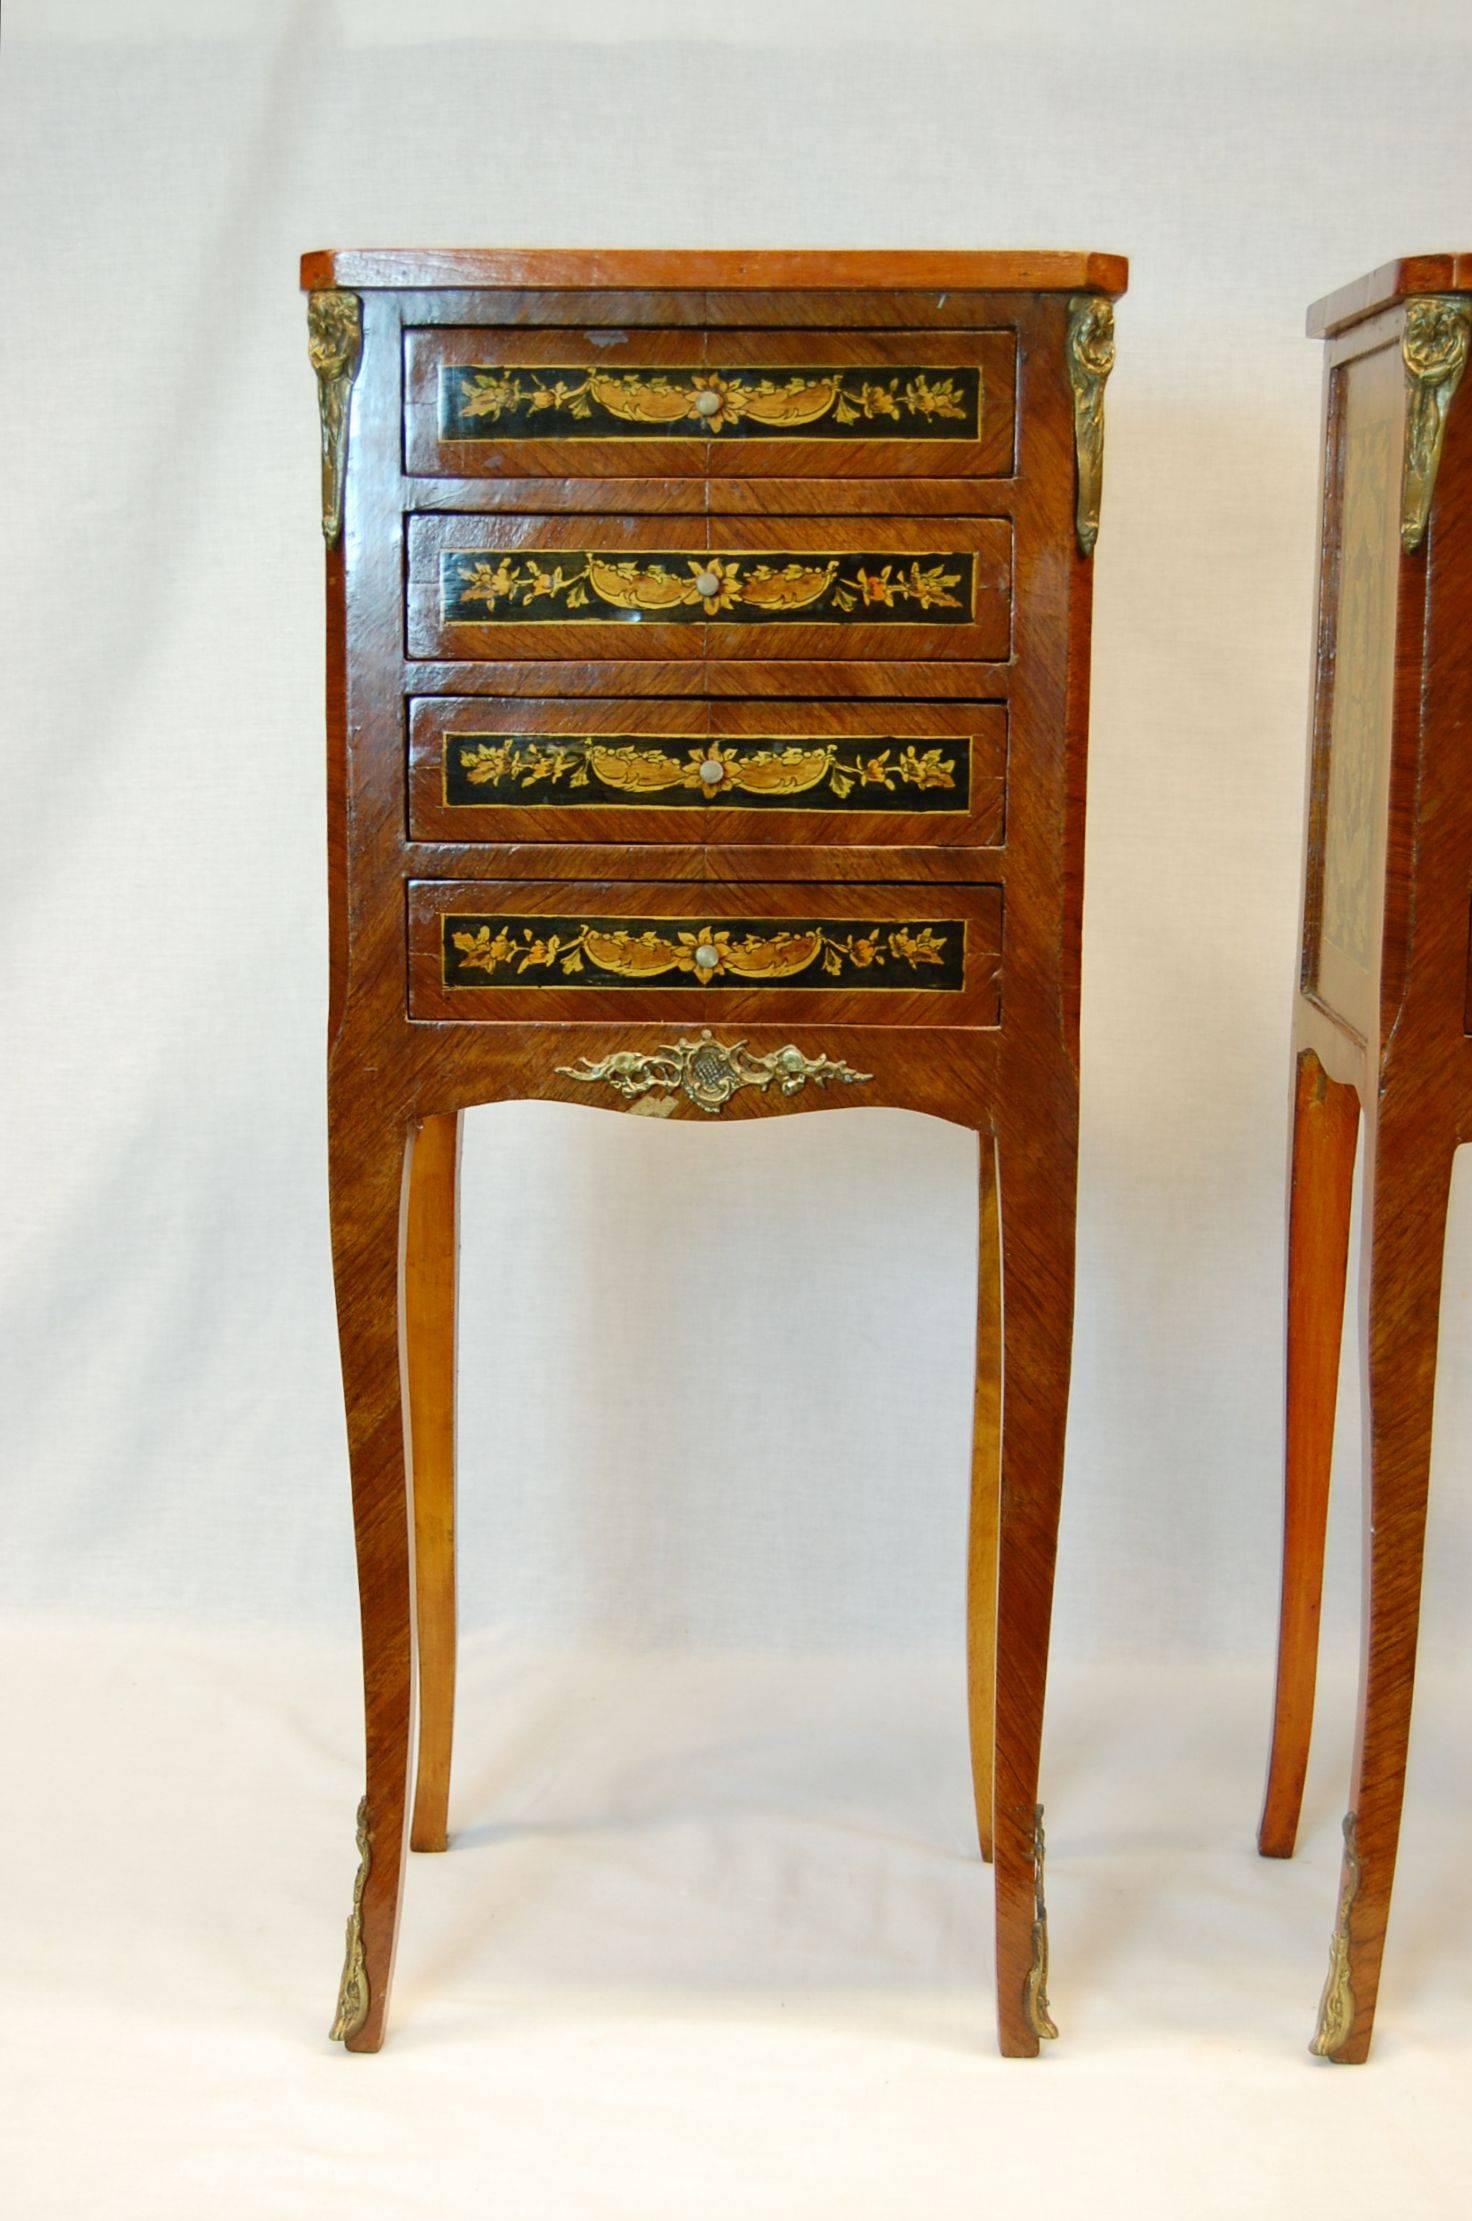 Pair of inlaid wooden night tables with four drawers in good condition.